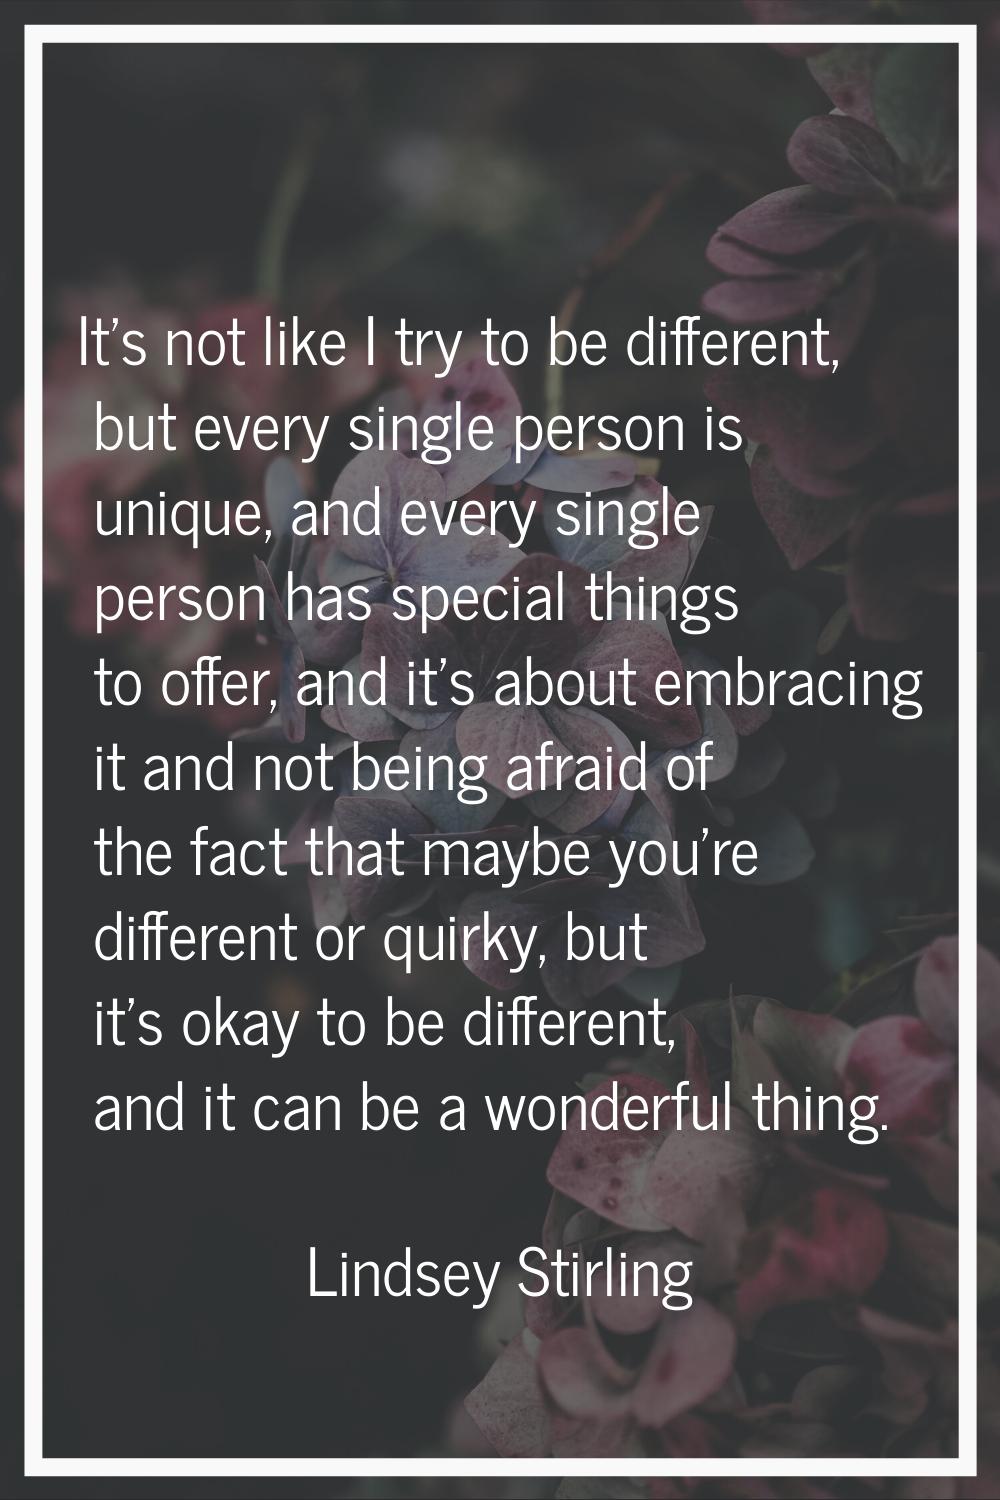 It's not like I try to be different, but every single person is unique, and every single person has